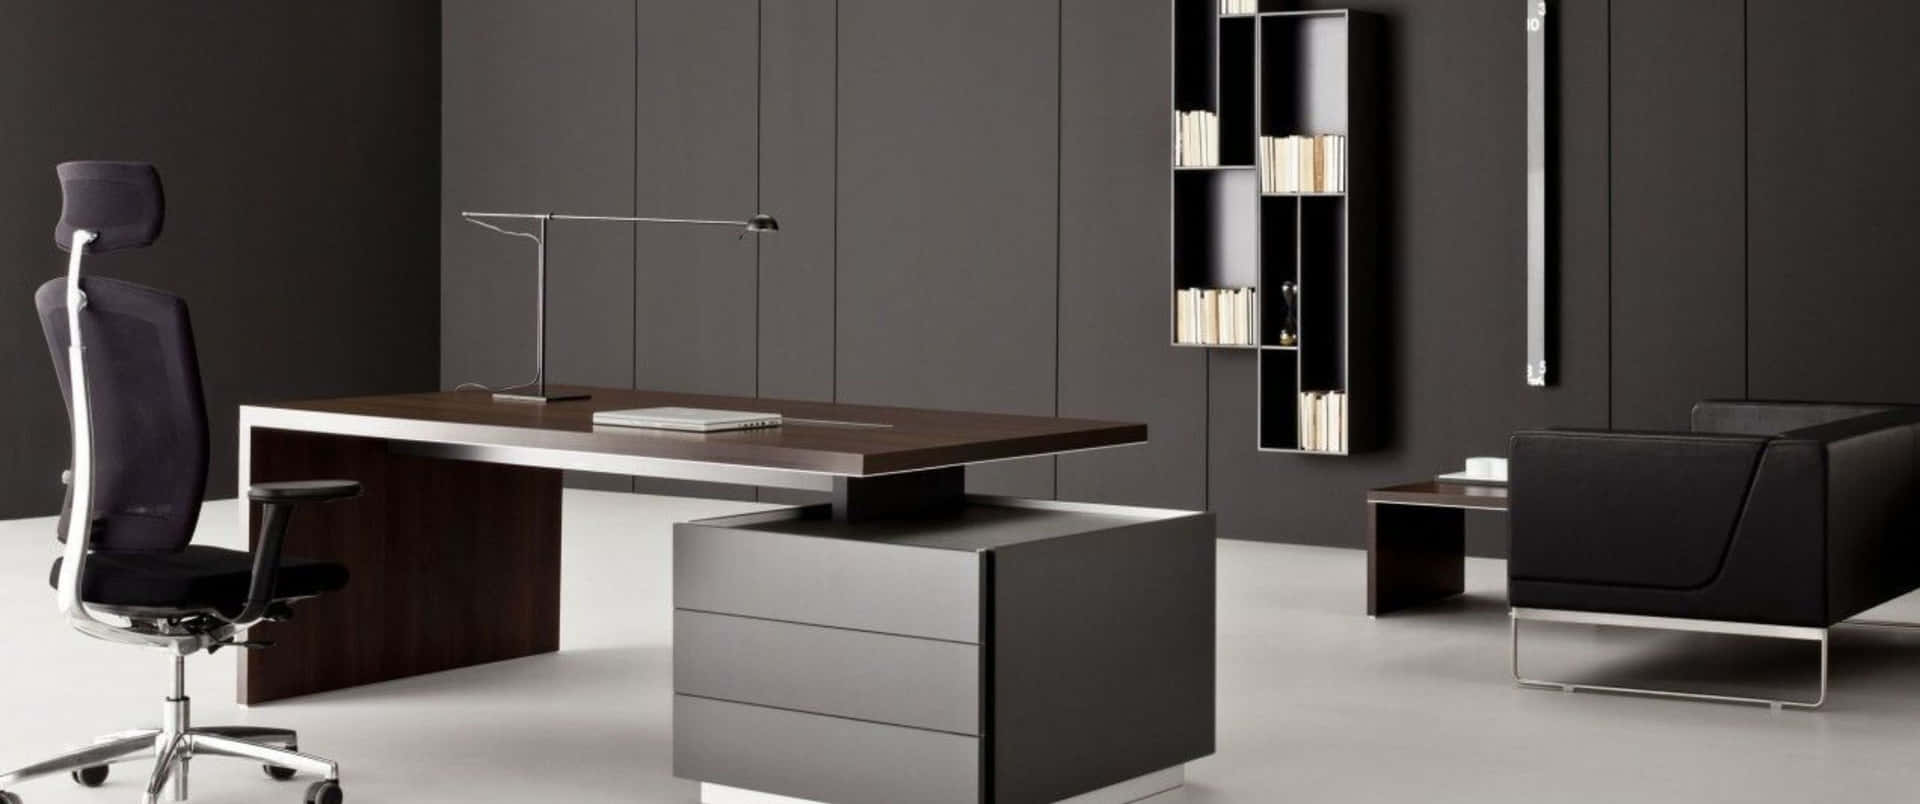 Modern Office Furniture With Black And Grey Walls